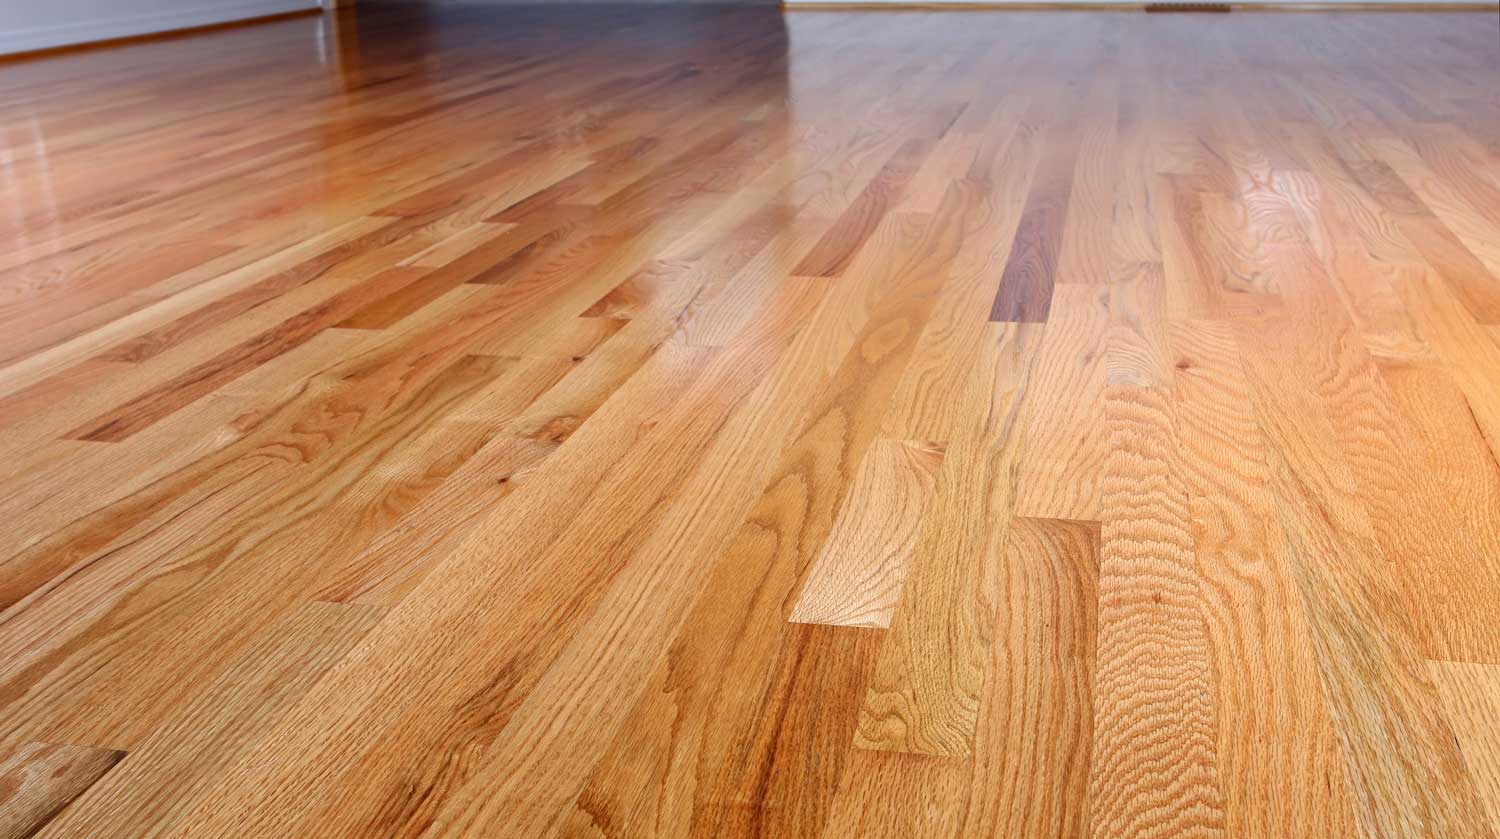 Cost To Refinish A Hardwood Floor, Labor Cost To Refinish Hardwood Floors